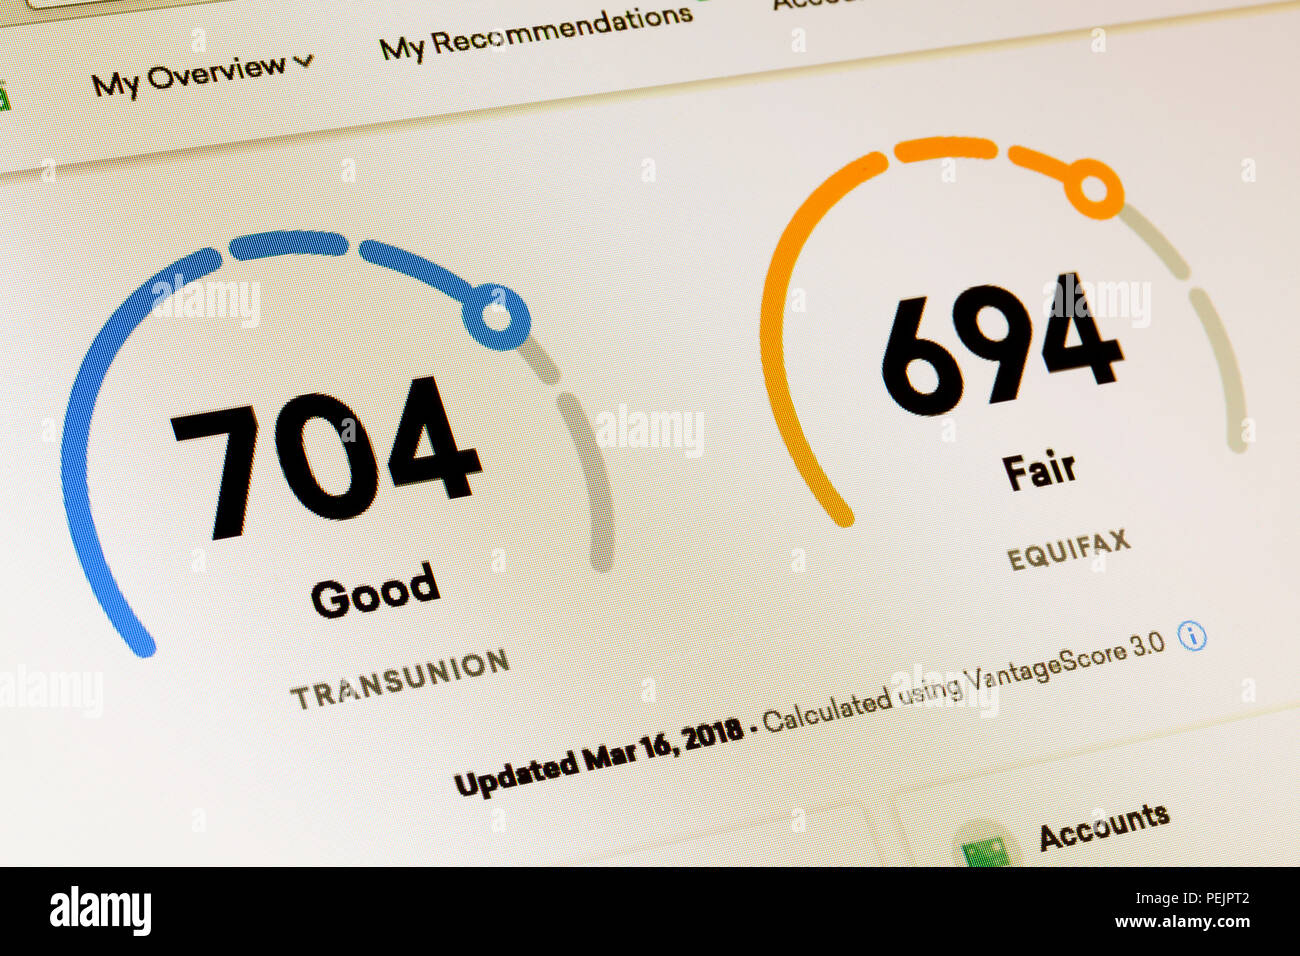 Credit score (FICO score) showing good and fair rating on on-line credit report site - USA Stock Photo